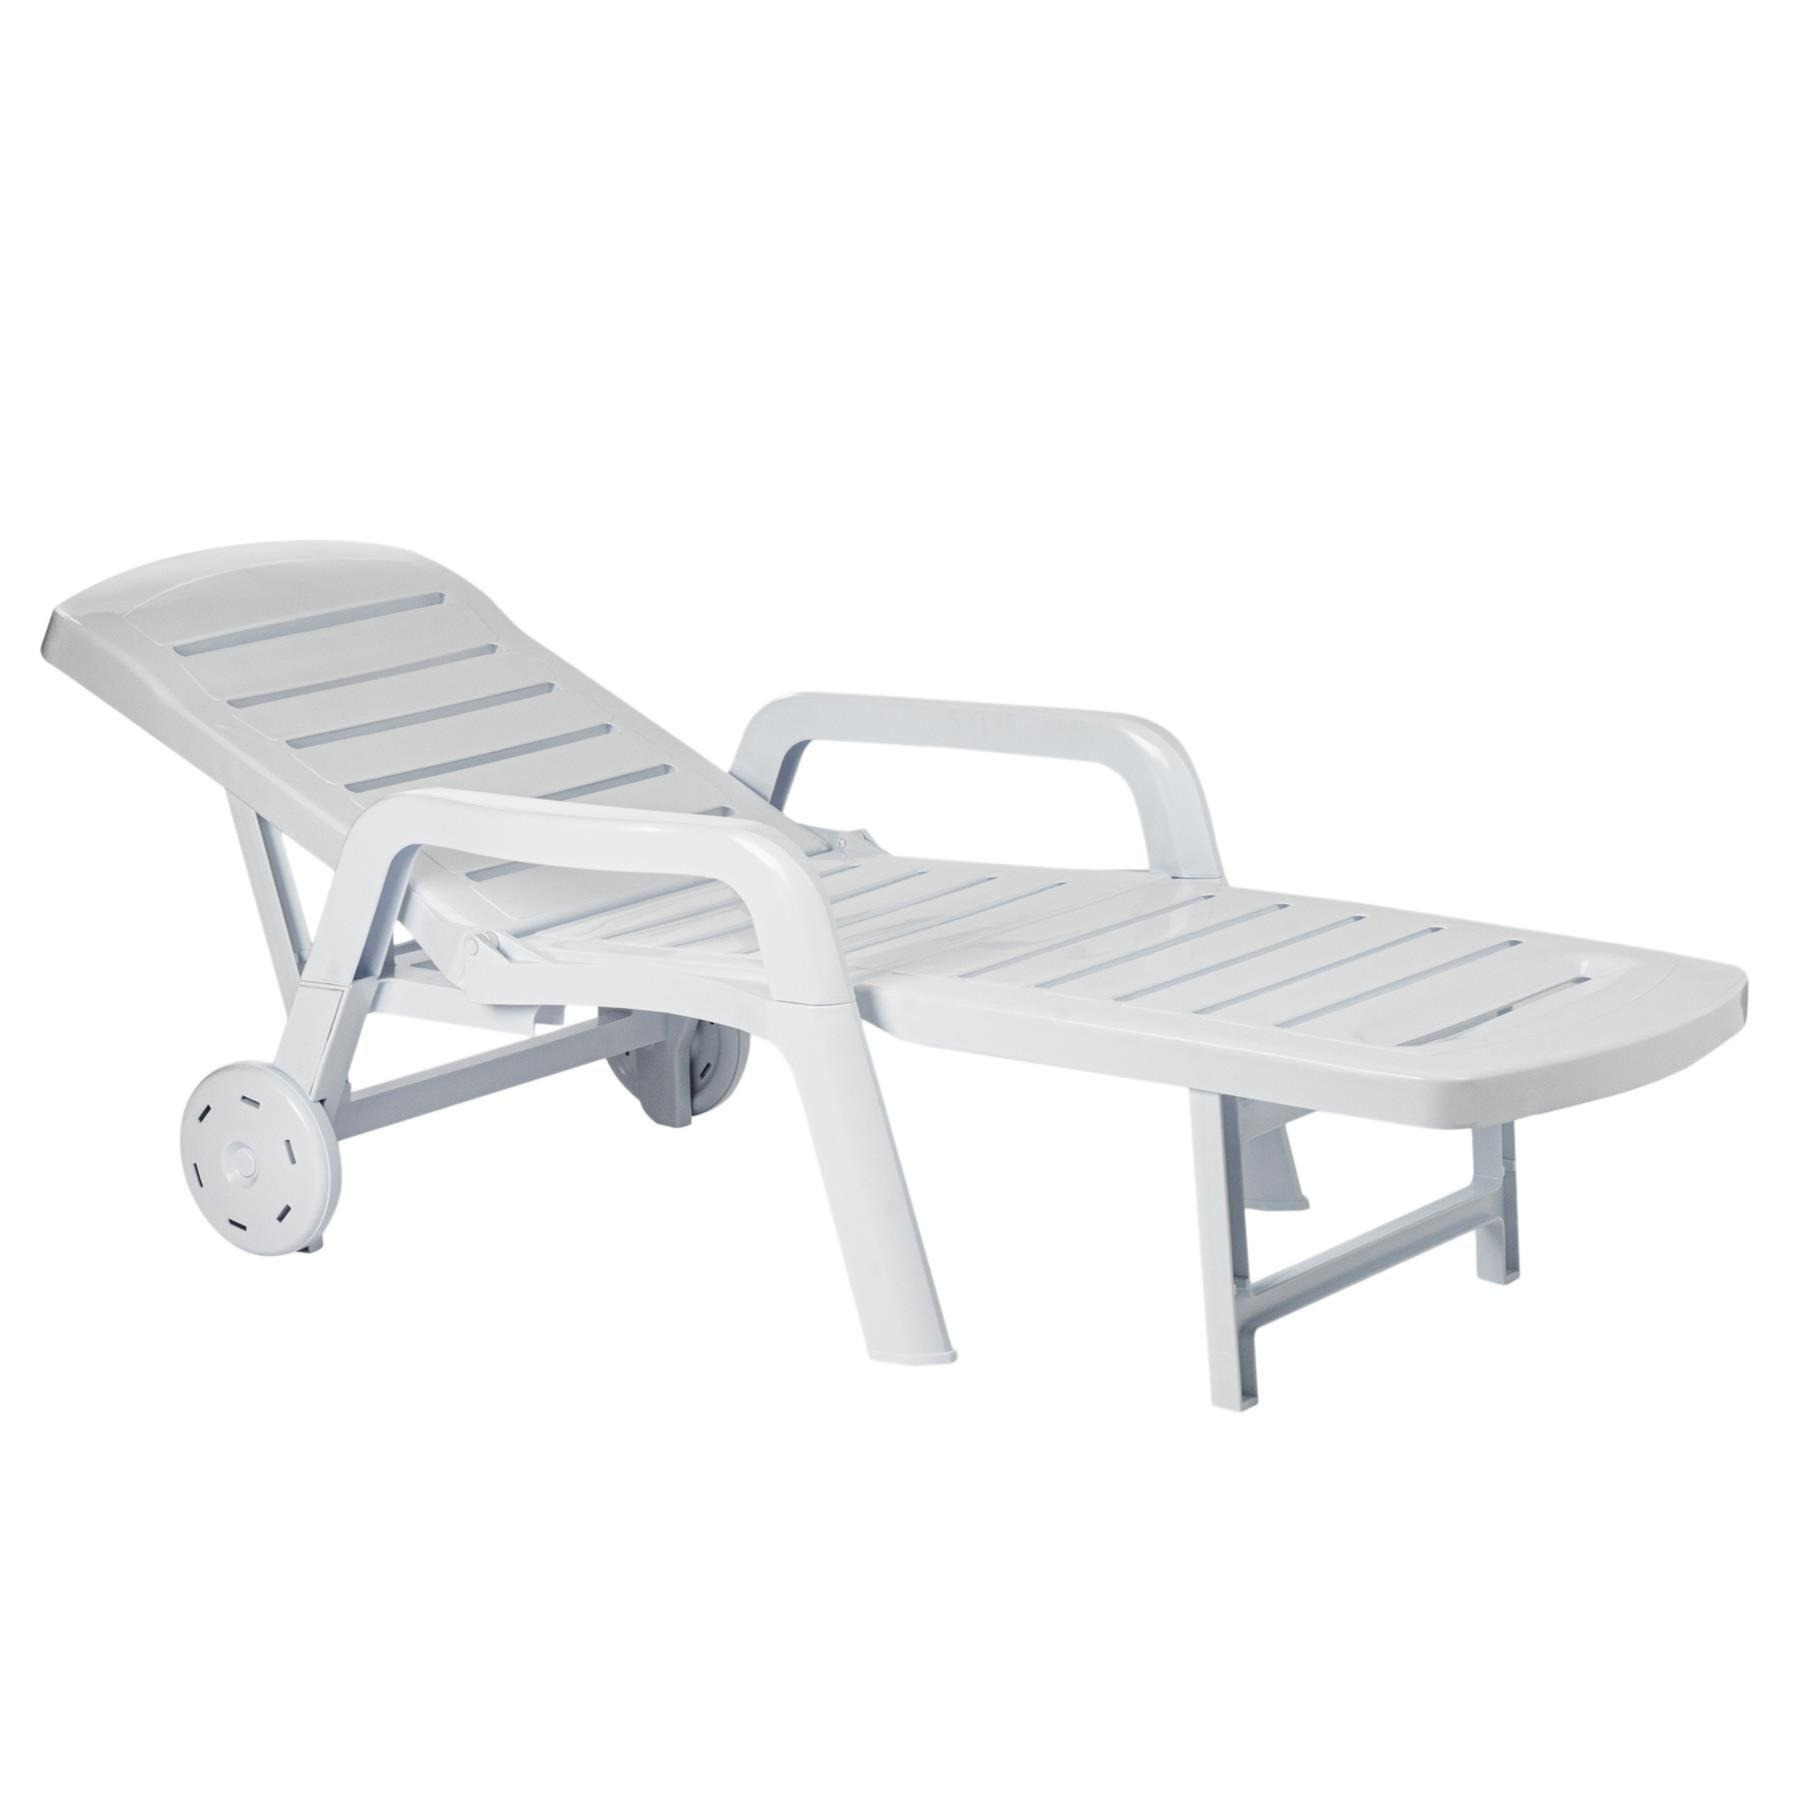 Palamos 3 Position Sun Loungers White Pack of 2 - image 1